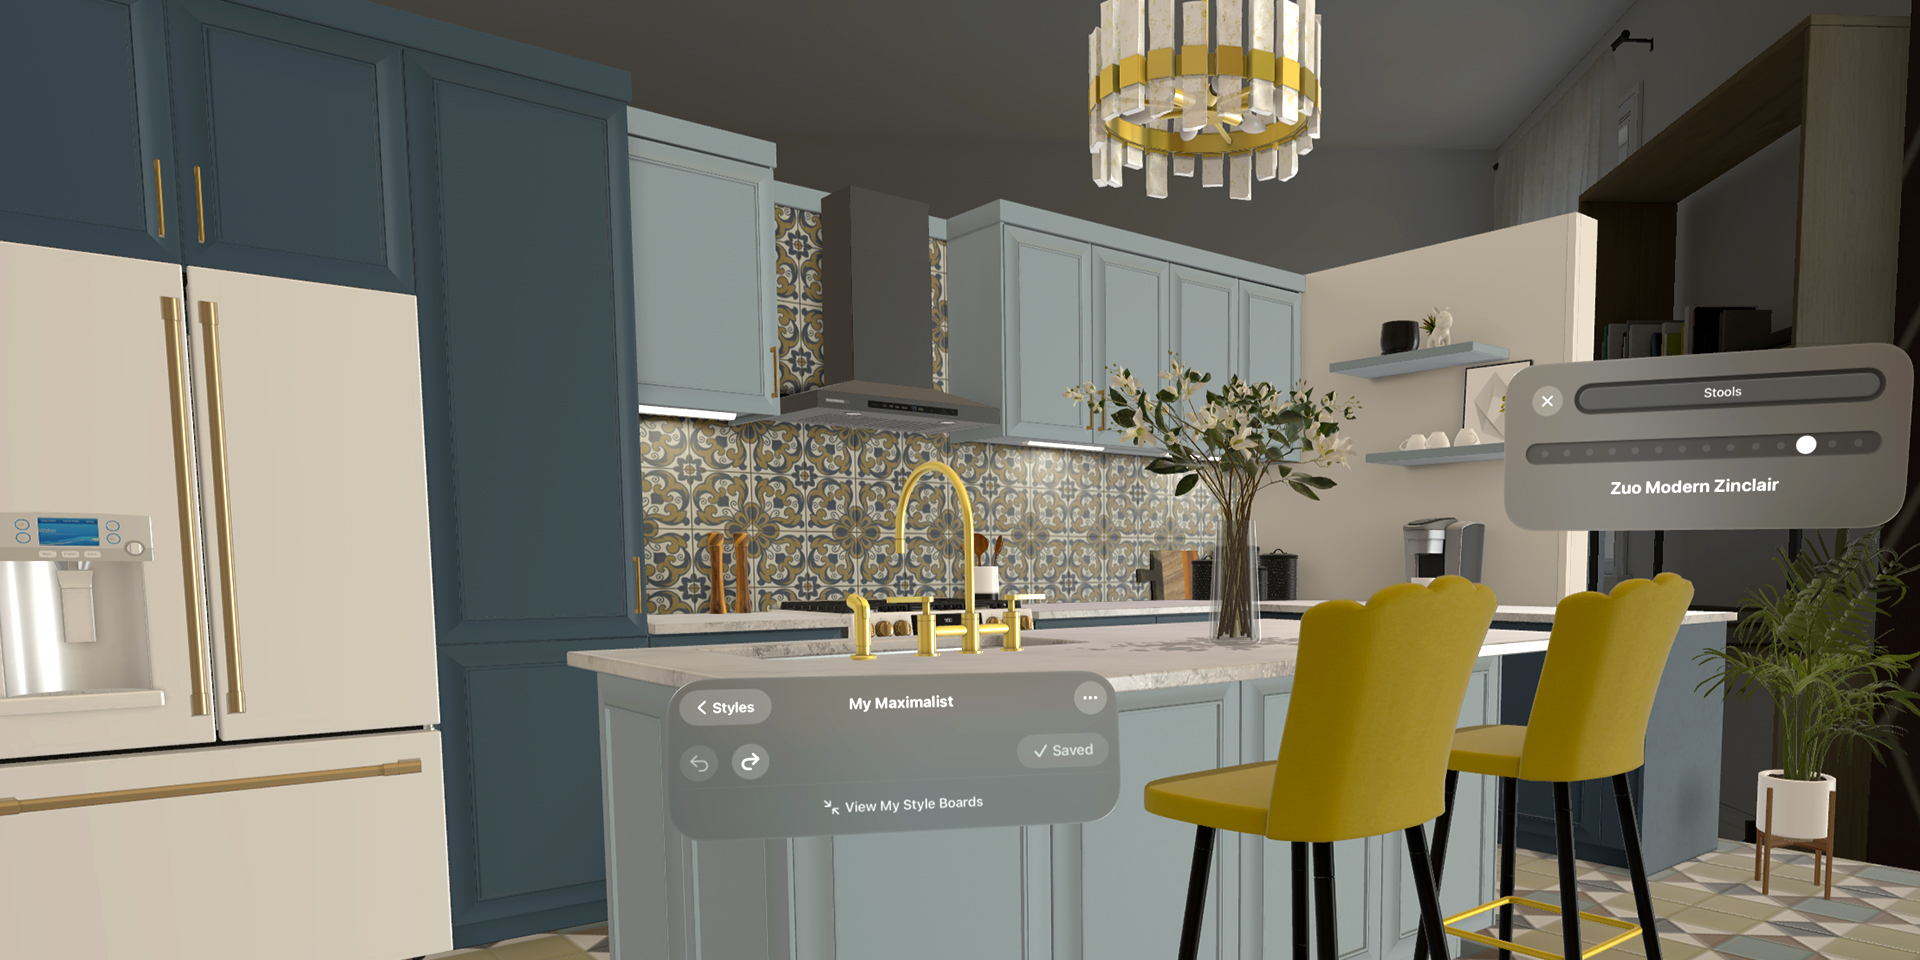 Maximalist Kitchen style selection seen in the Lowe's Innovation Labs experience Lowe's Style Studio, created exclusively for Apple Vision Pro. 